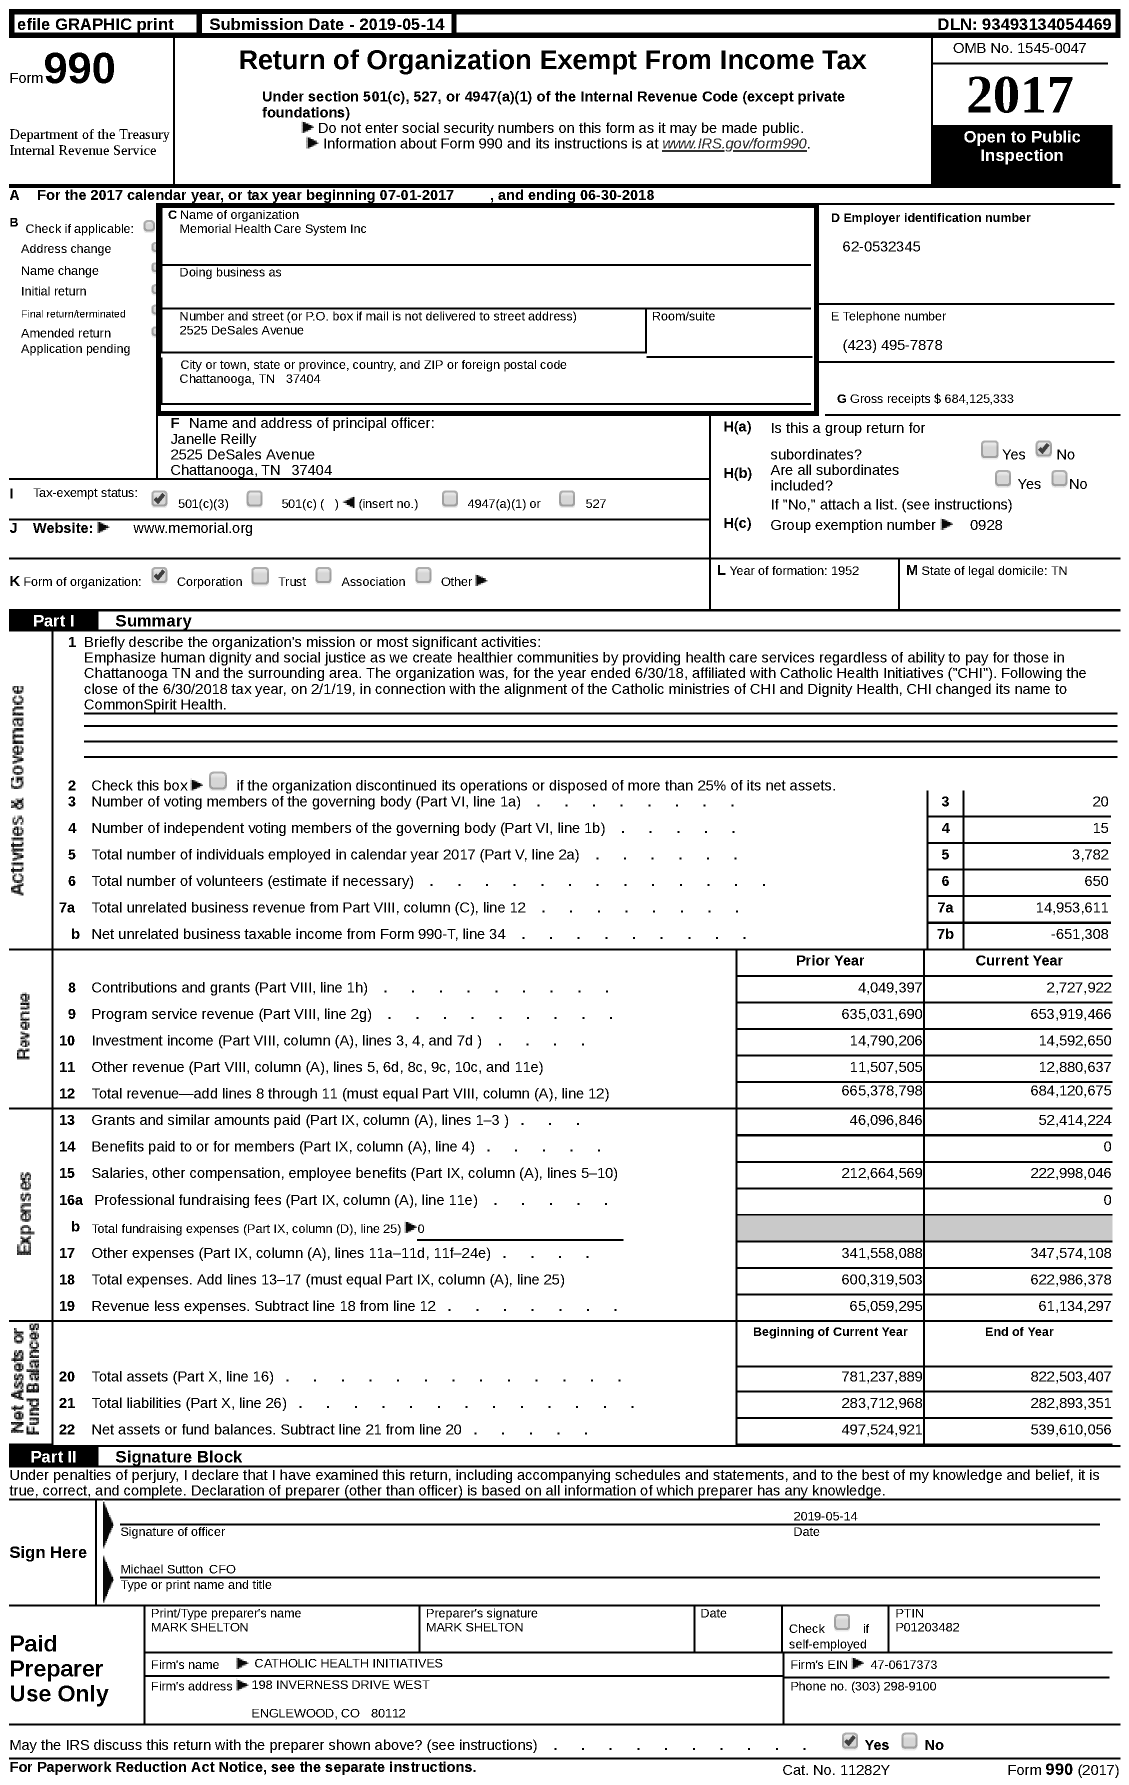 Image of first page of 2017 Form 990 for Memorial Health Care System